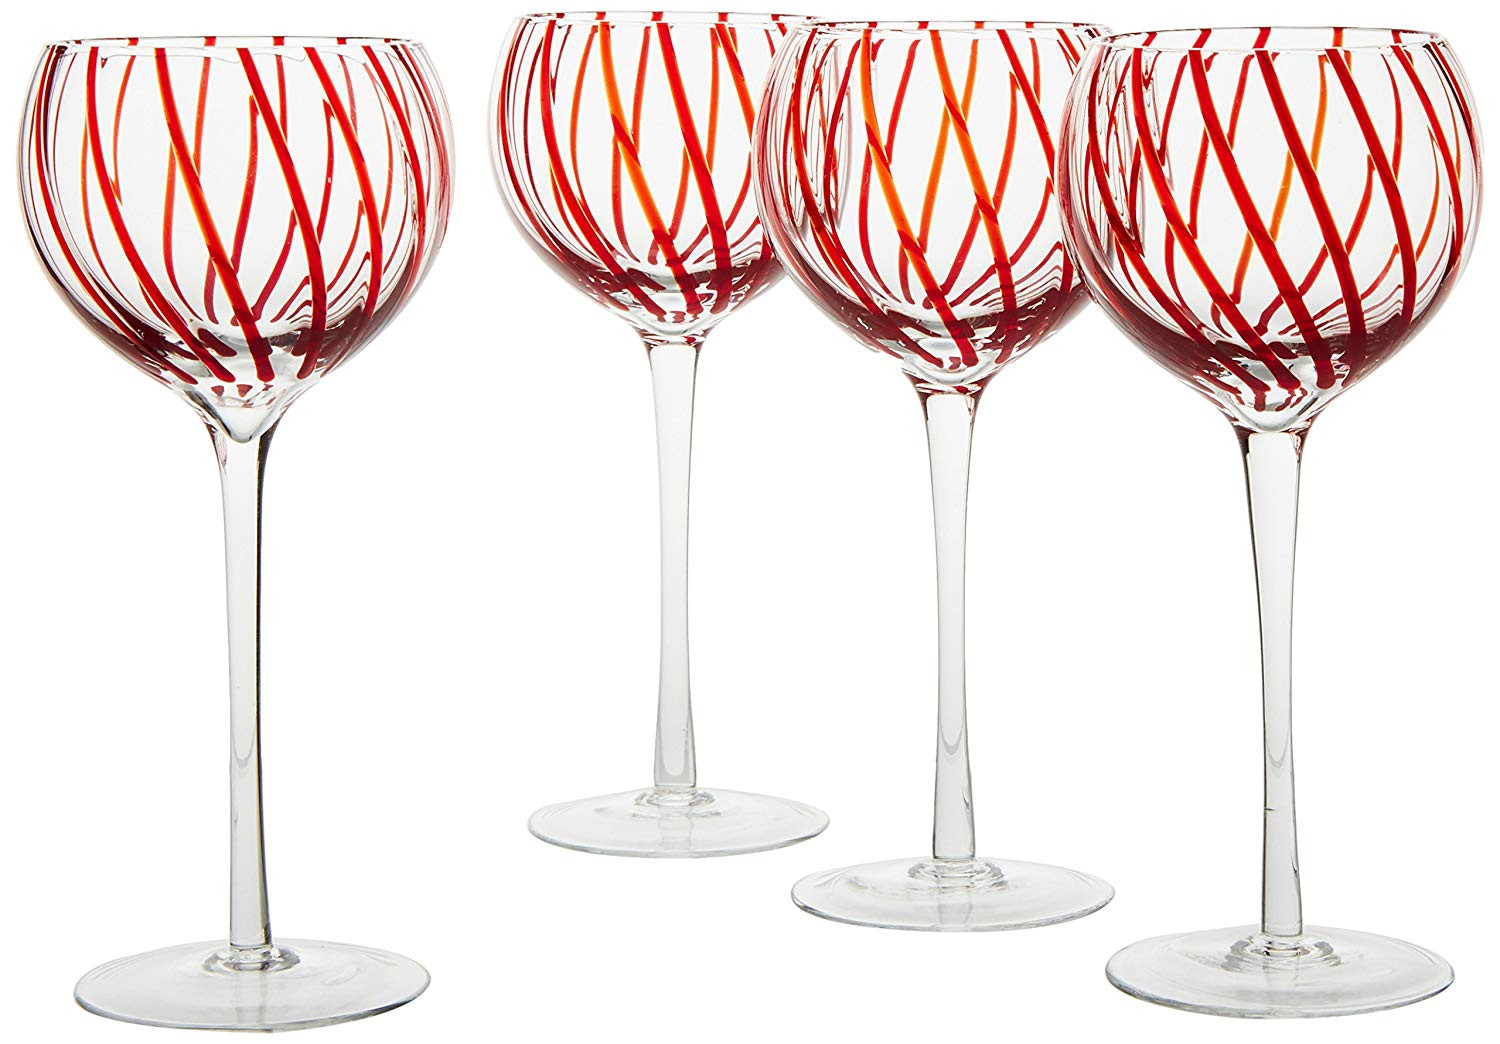 11 Unique Lenox Fine Crystal Vase 2024 free download lenox fine crystal vase of amazon com lenox holiday jewel balloons wine glasses set of 4 in amazon com lenox holiday jewel balloons wine glasses set of 4 clear kitchen dining